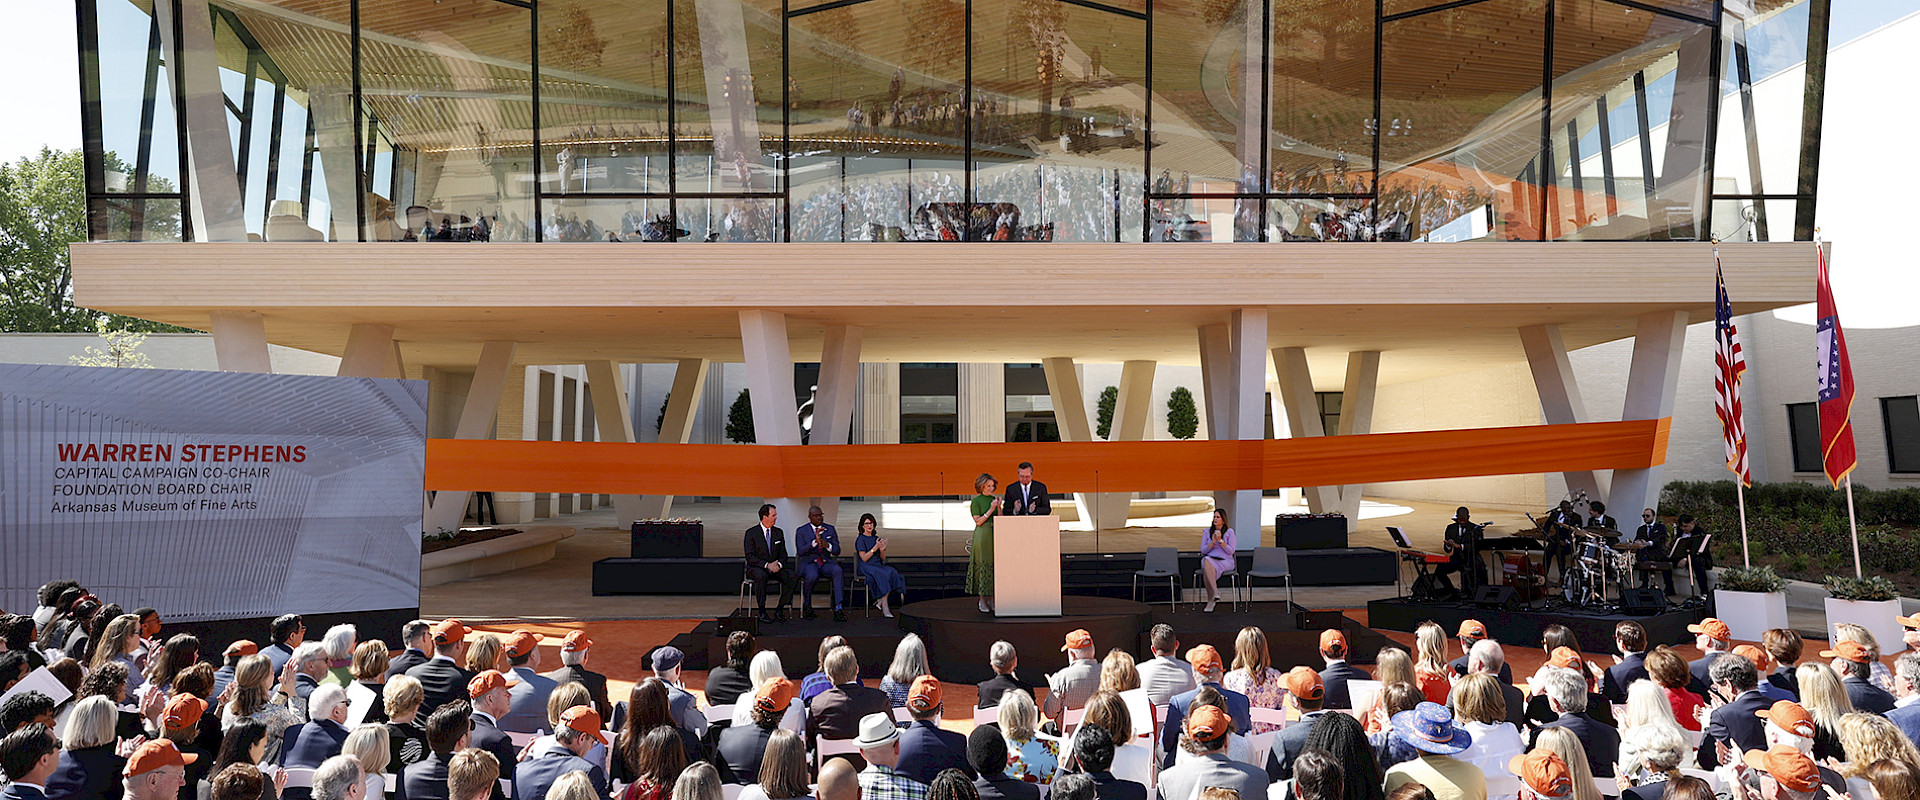 Photo of Harriet and Warren Stephens at a podium on a stage in front of a large orange ribbon wrapped around the courtyard entrance to AMFA on opening day.